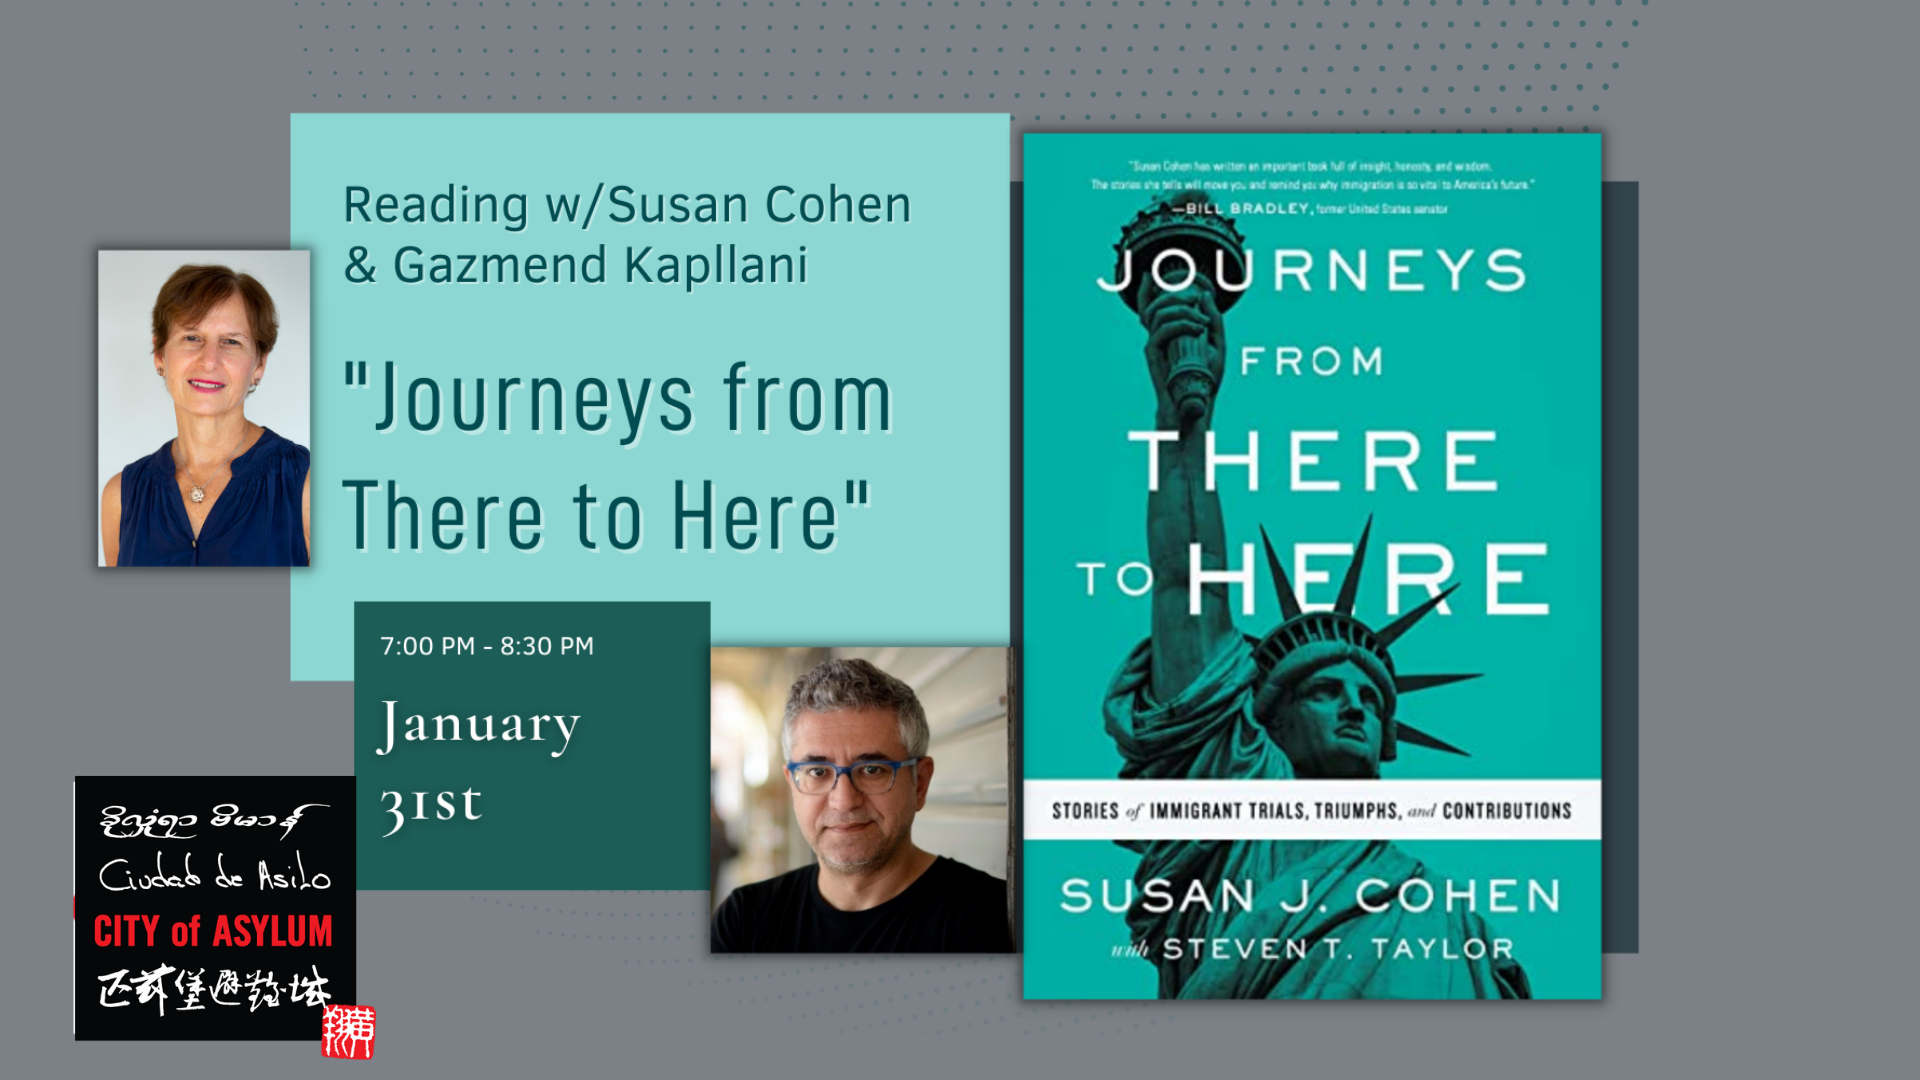 Susan Cohen: "Journeys from There to Here"